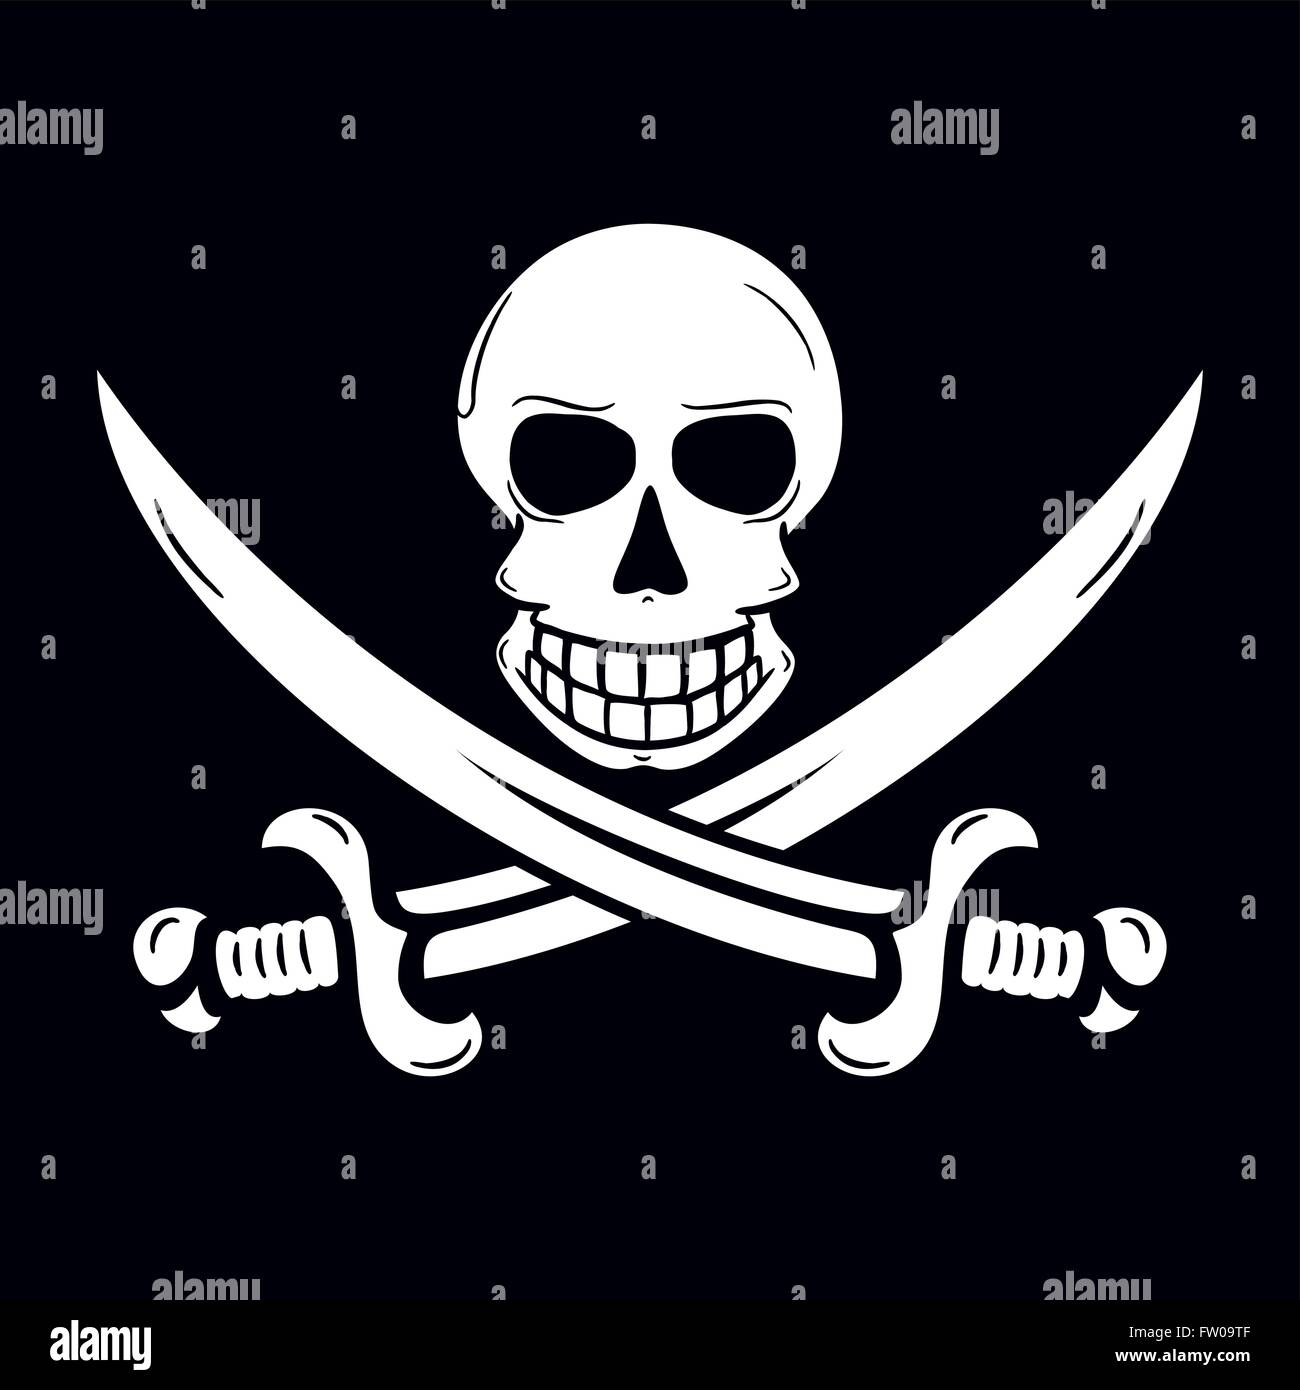 Jolly Roger pirate flag à la Jack Rackham with a skull and two crossing swords. Stock Vector